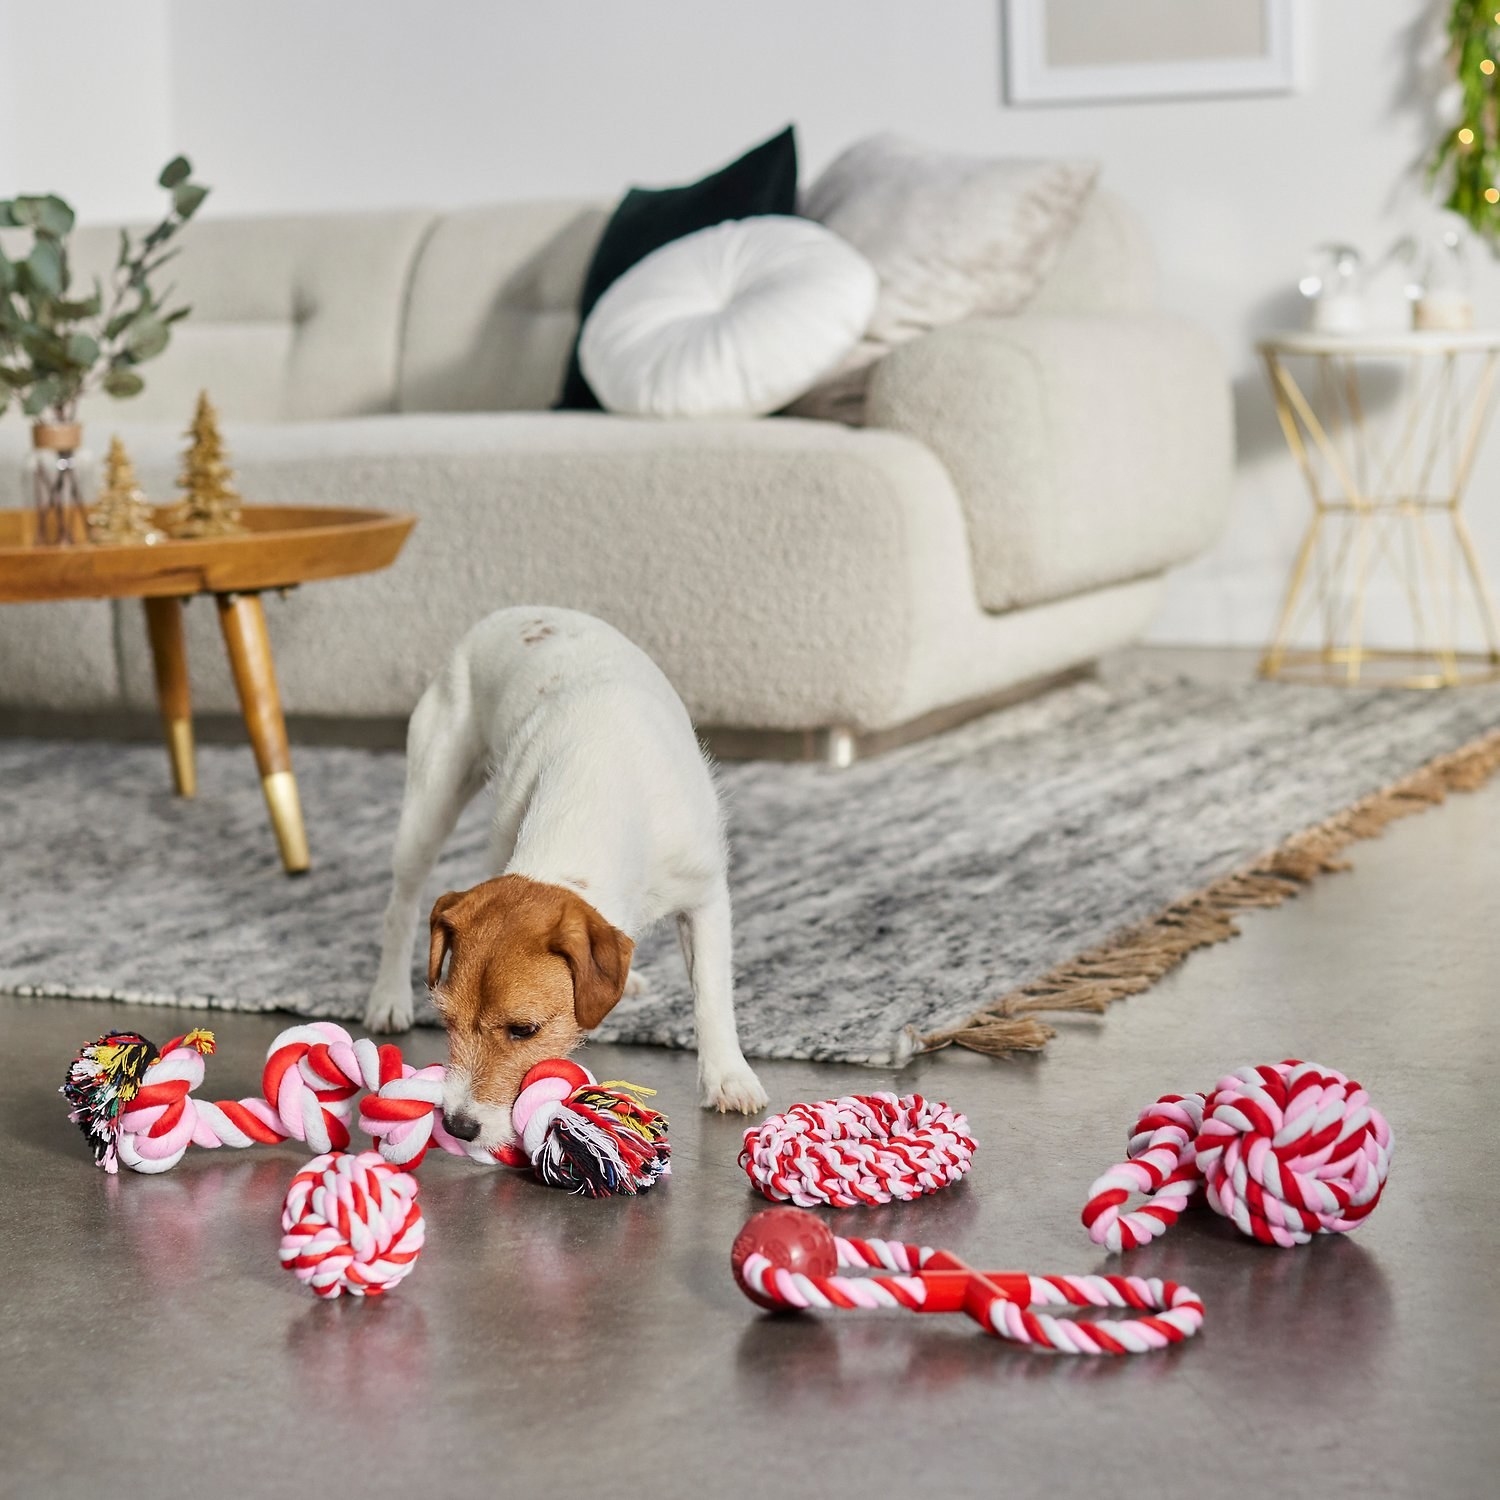 A small, cute dog playing with five red and white striped rope toys.